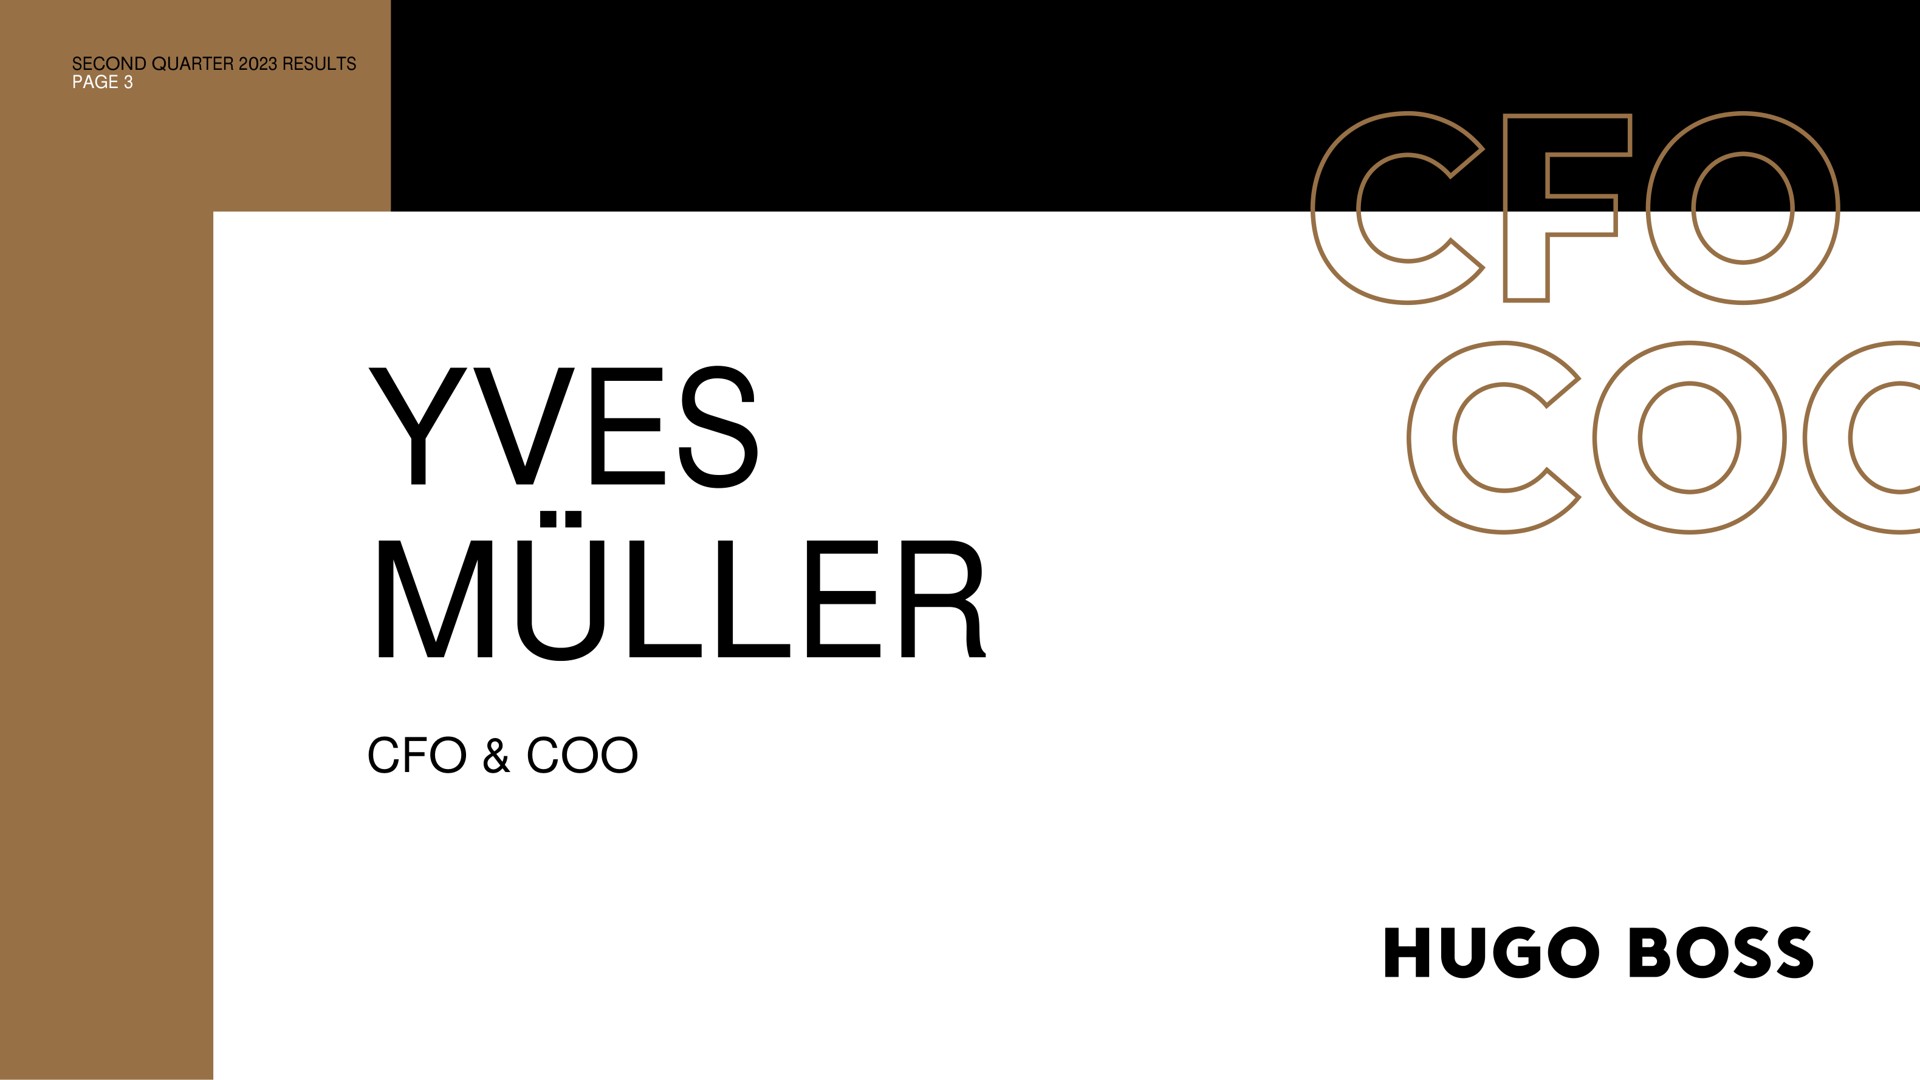 second quarter results page coo muller boss | Hugo Boss